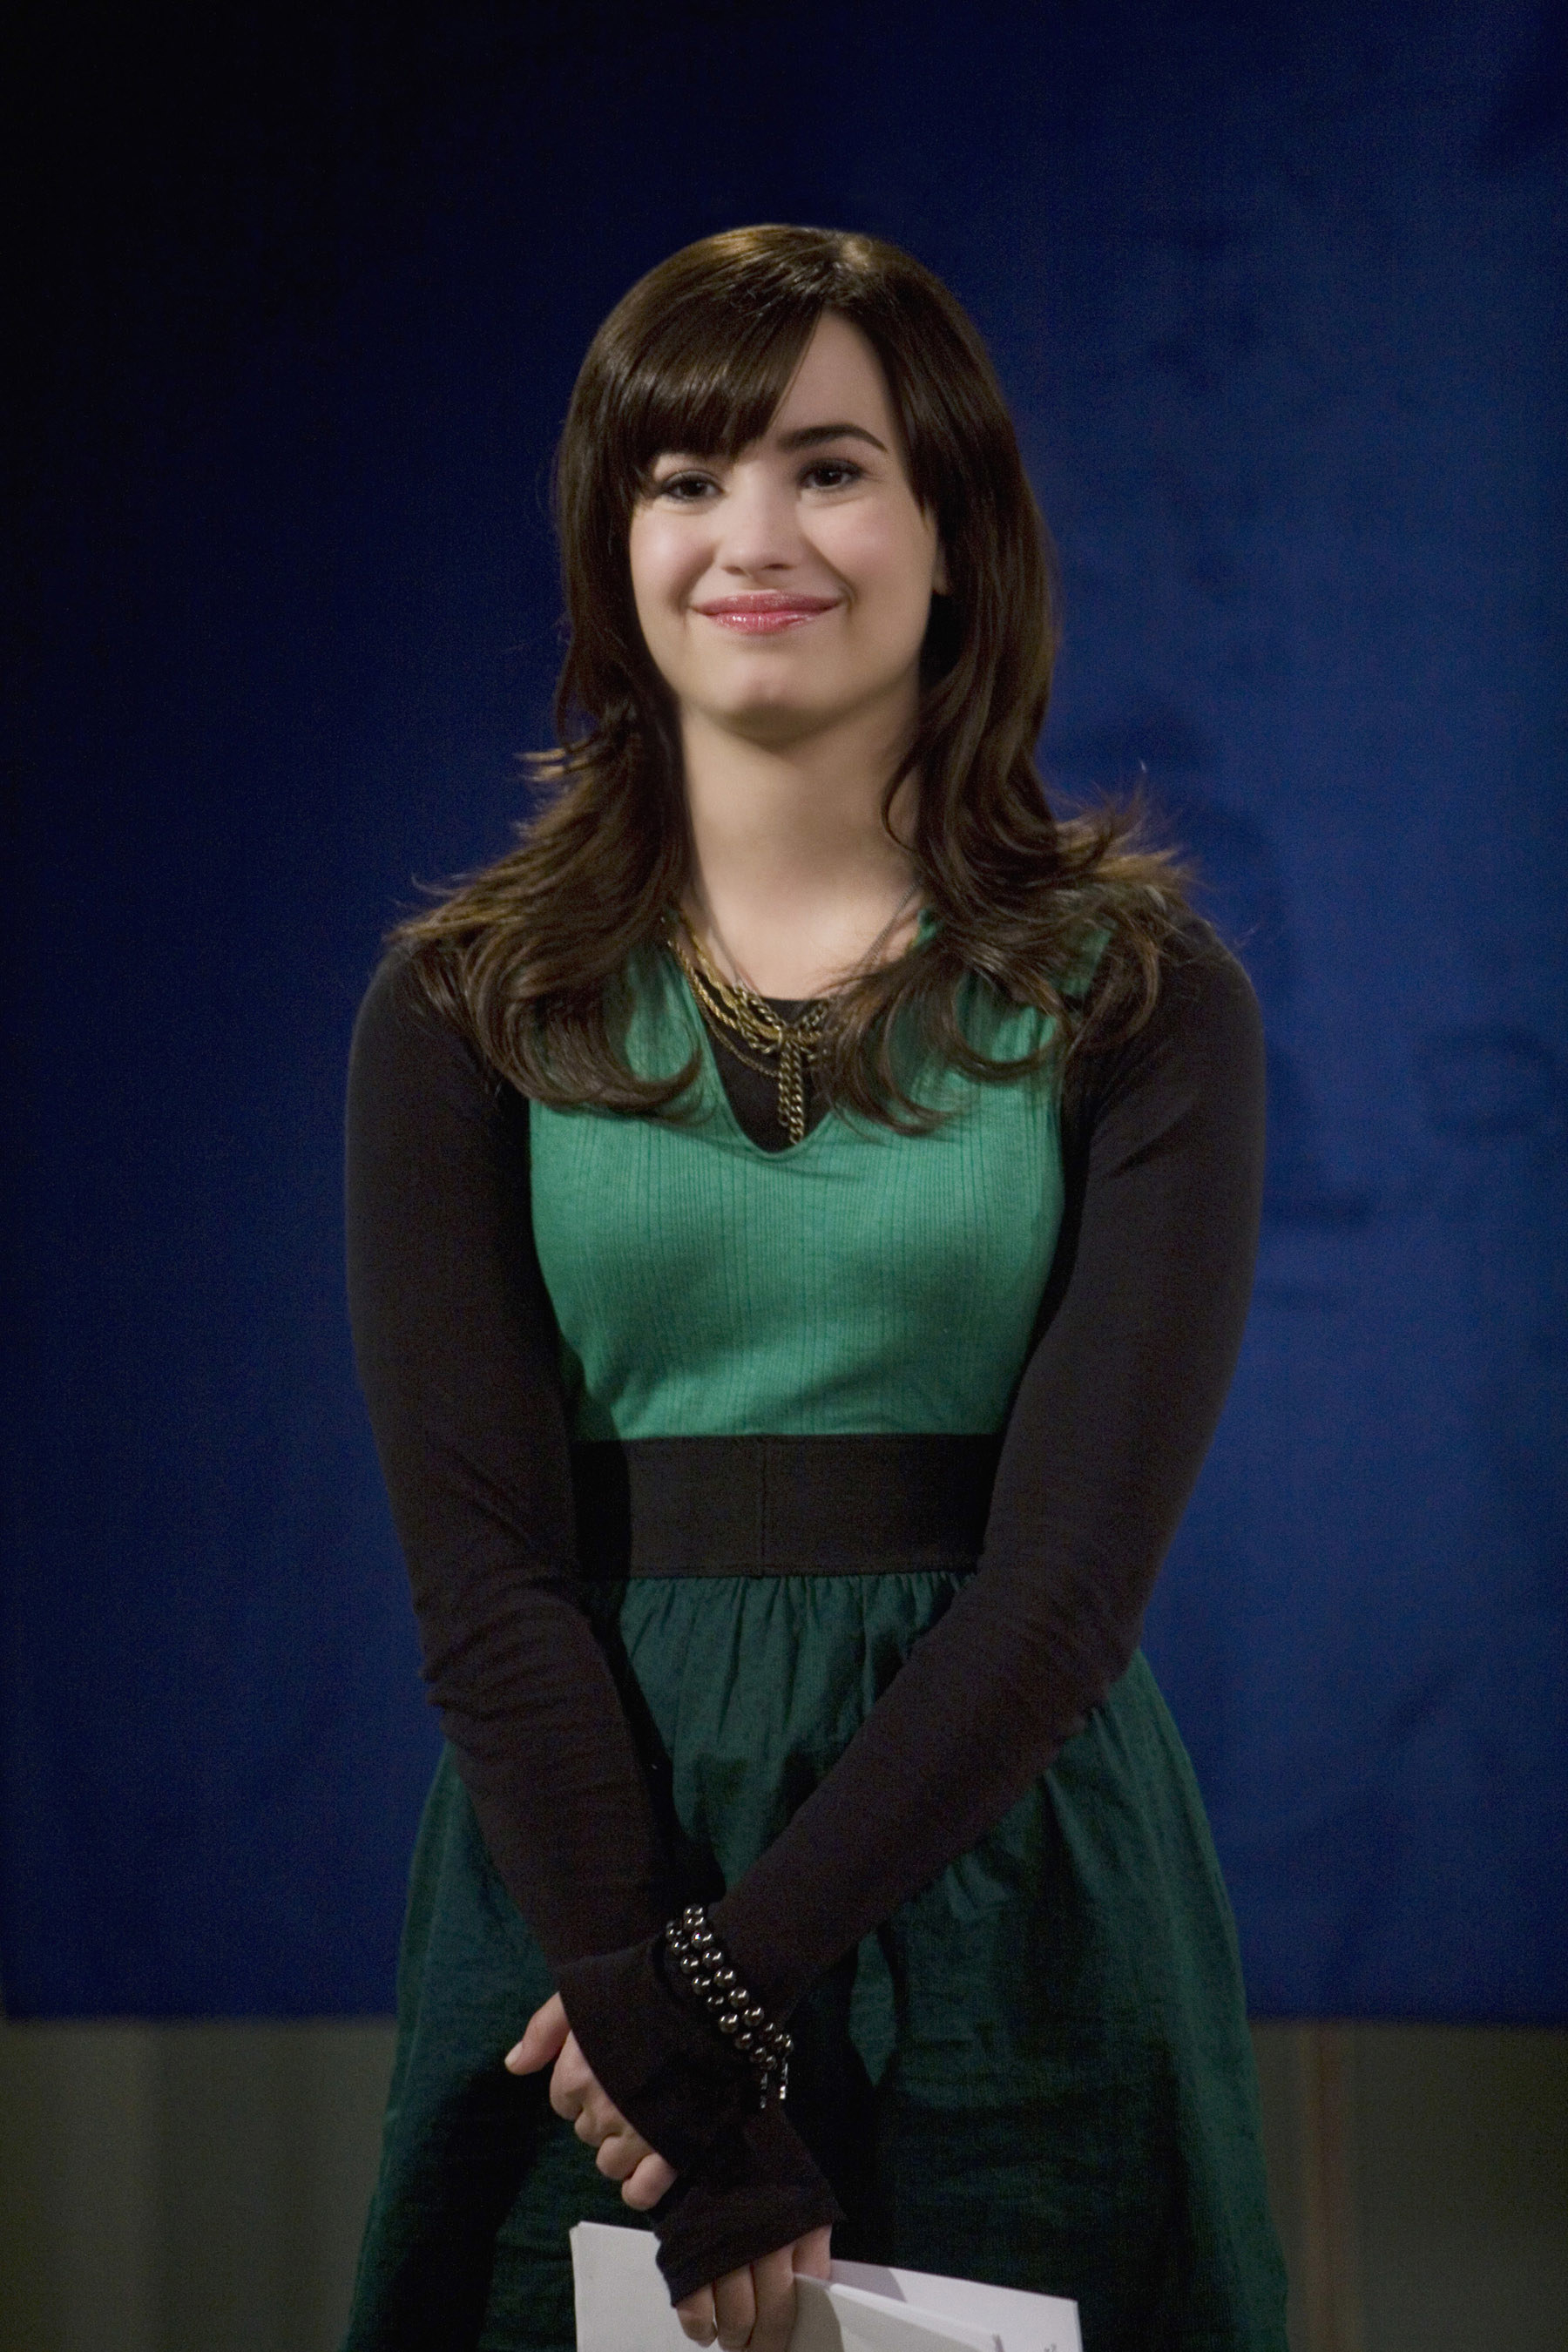 A younger Demi smiling